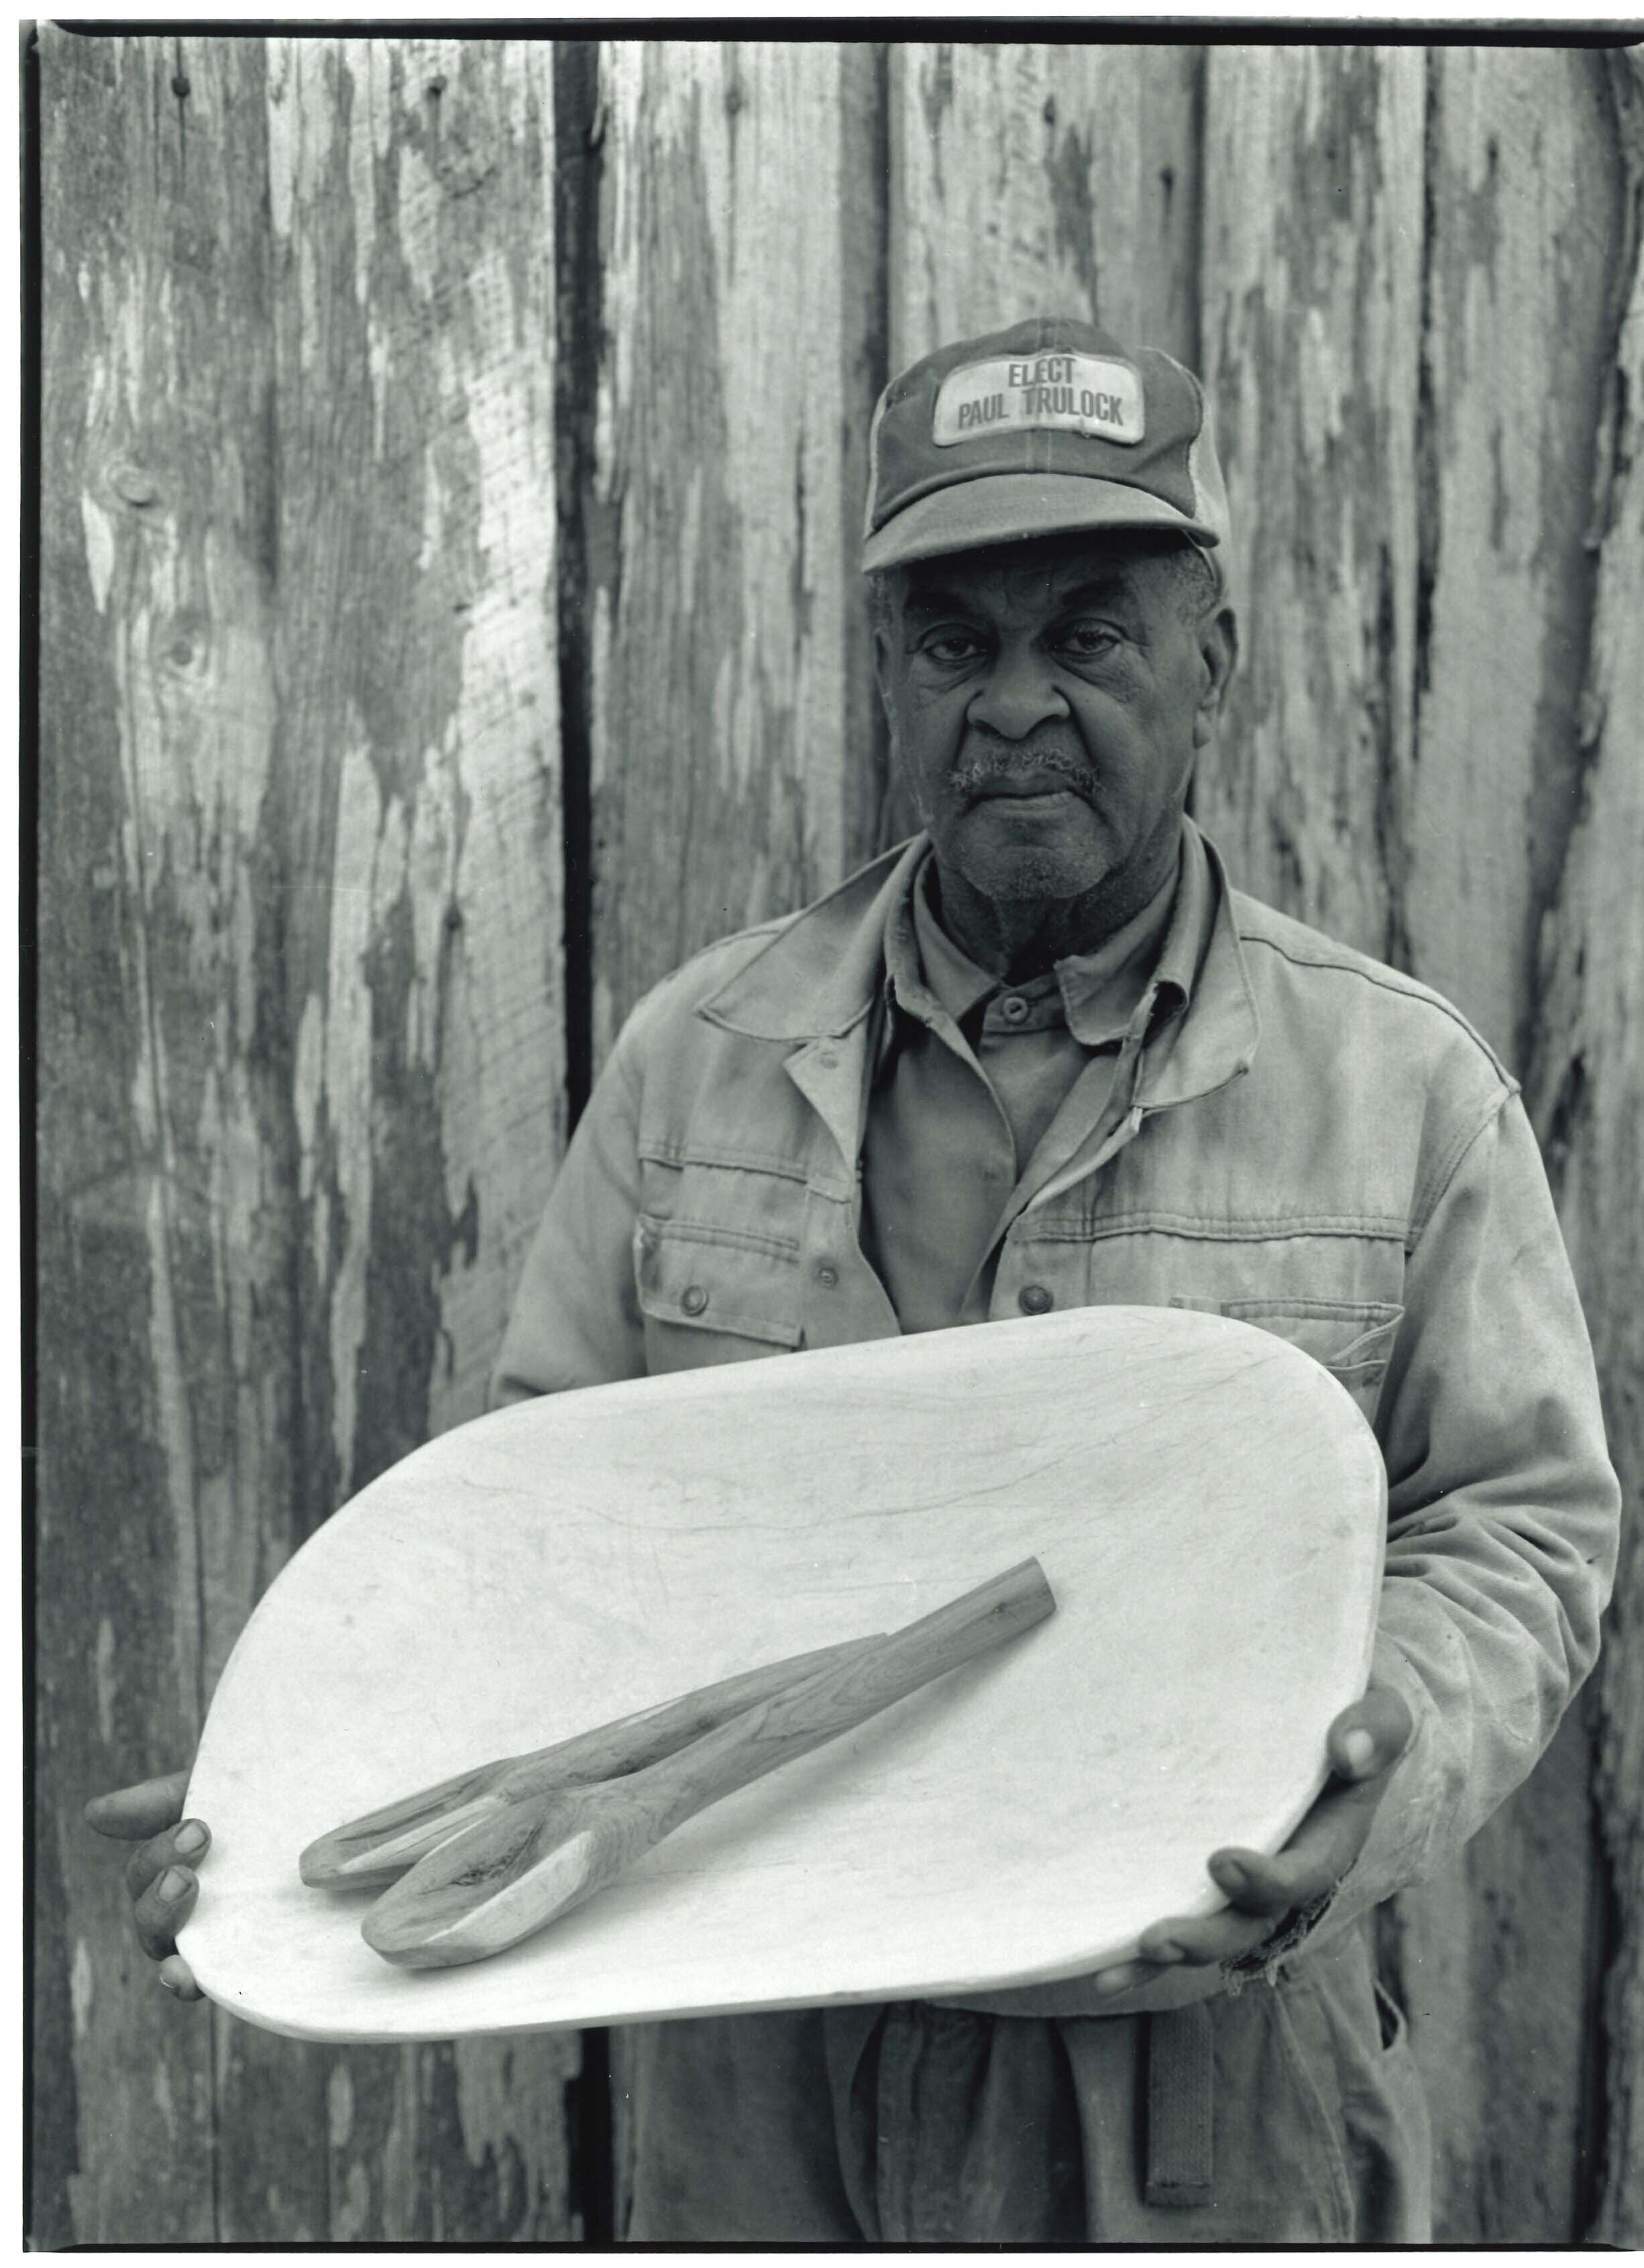   Mr. Lee Bradwell Holding Hand Carved Bowl and Utensils, Climax, GA , 1980 Gelatin silver print  11 1/4 x 8 1/4 in. (image size)  The Do Good Fund, Inc., 2020-072 